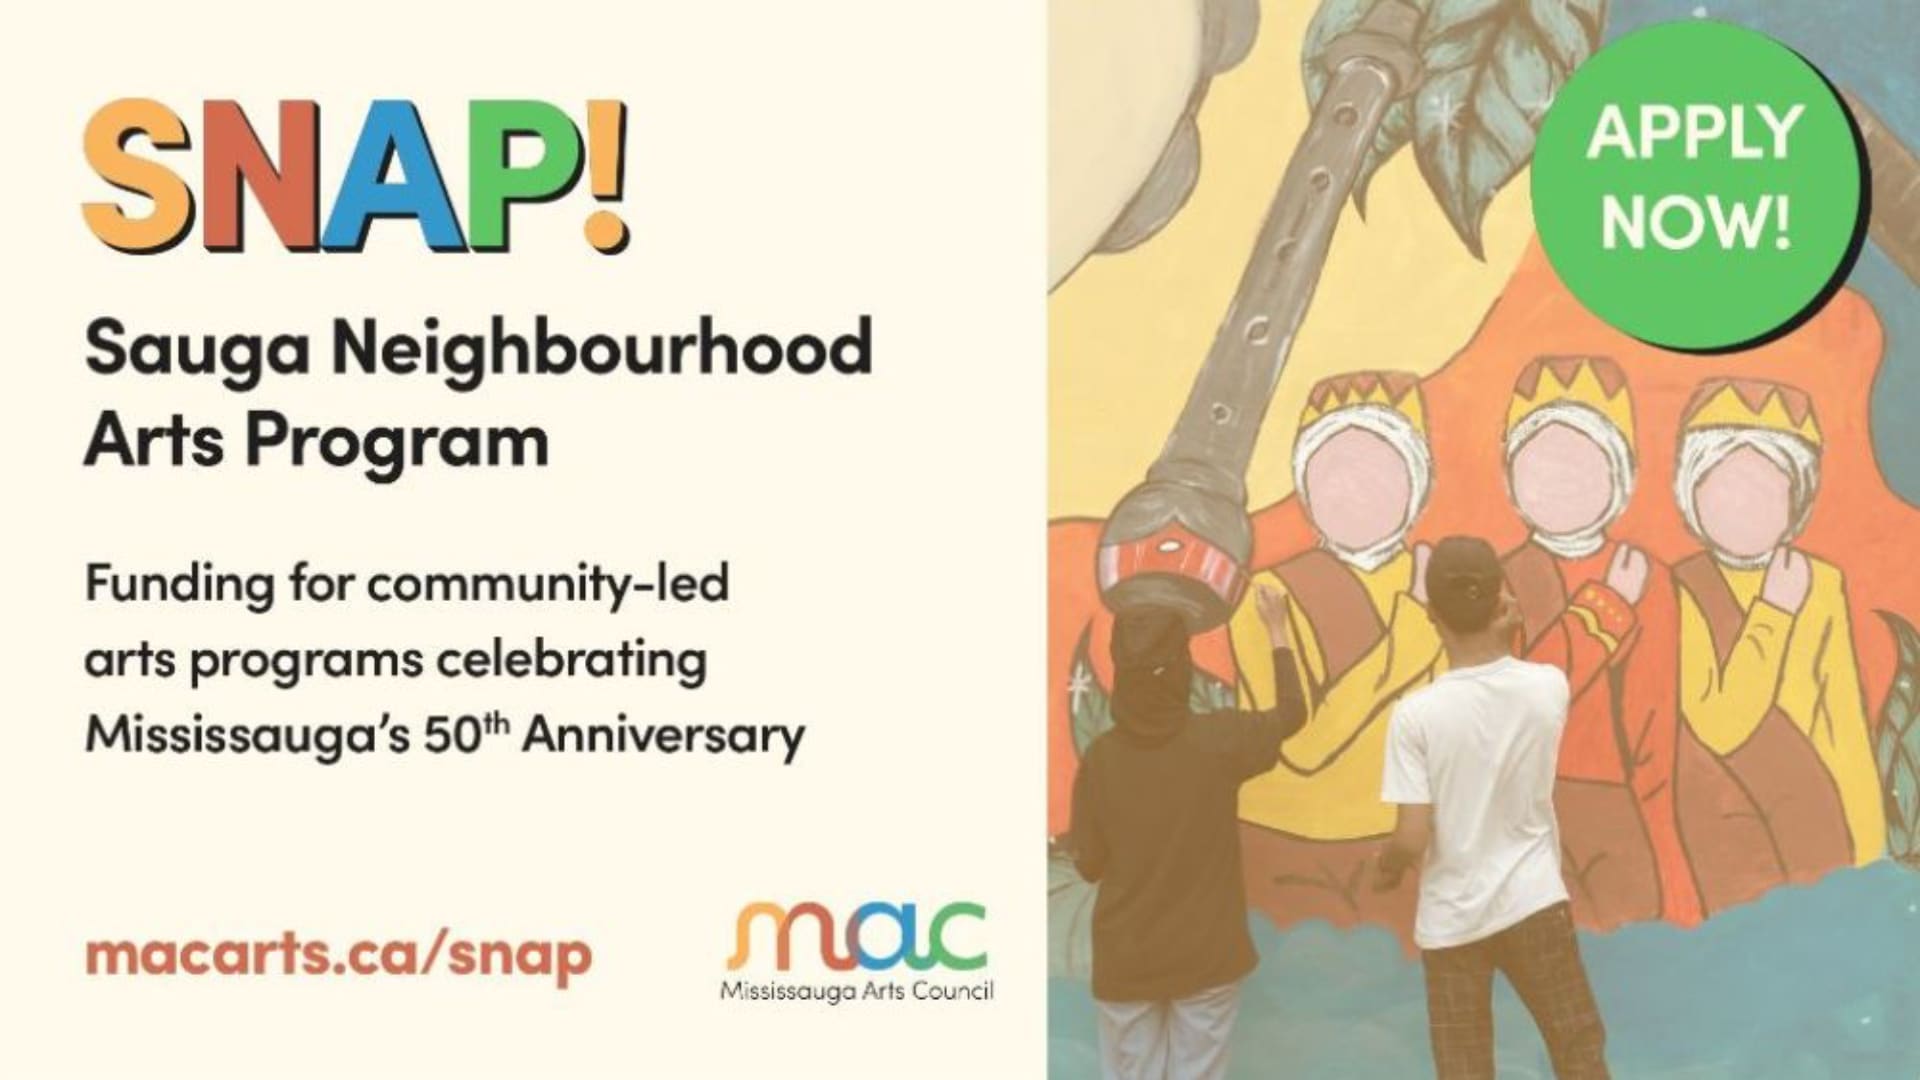 Get Creative to Celebrate Mississauga’s 50th Through the Arts…It’s a SNAP!